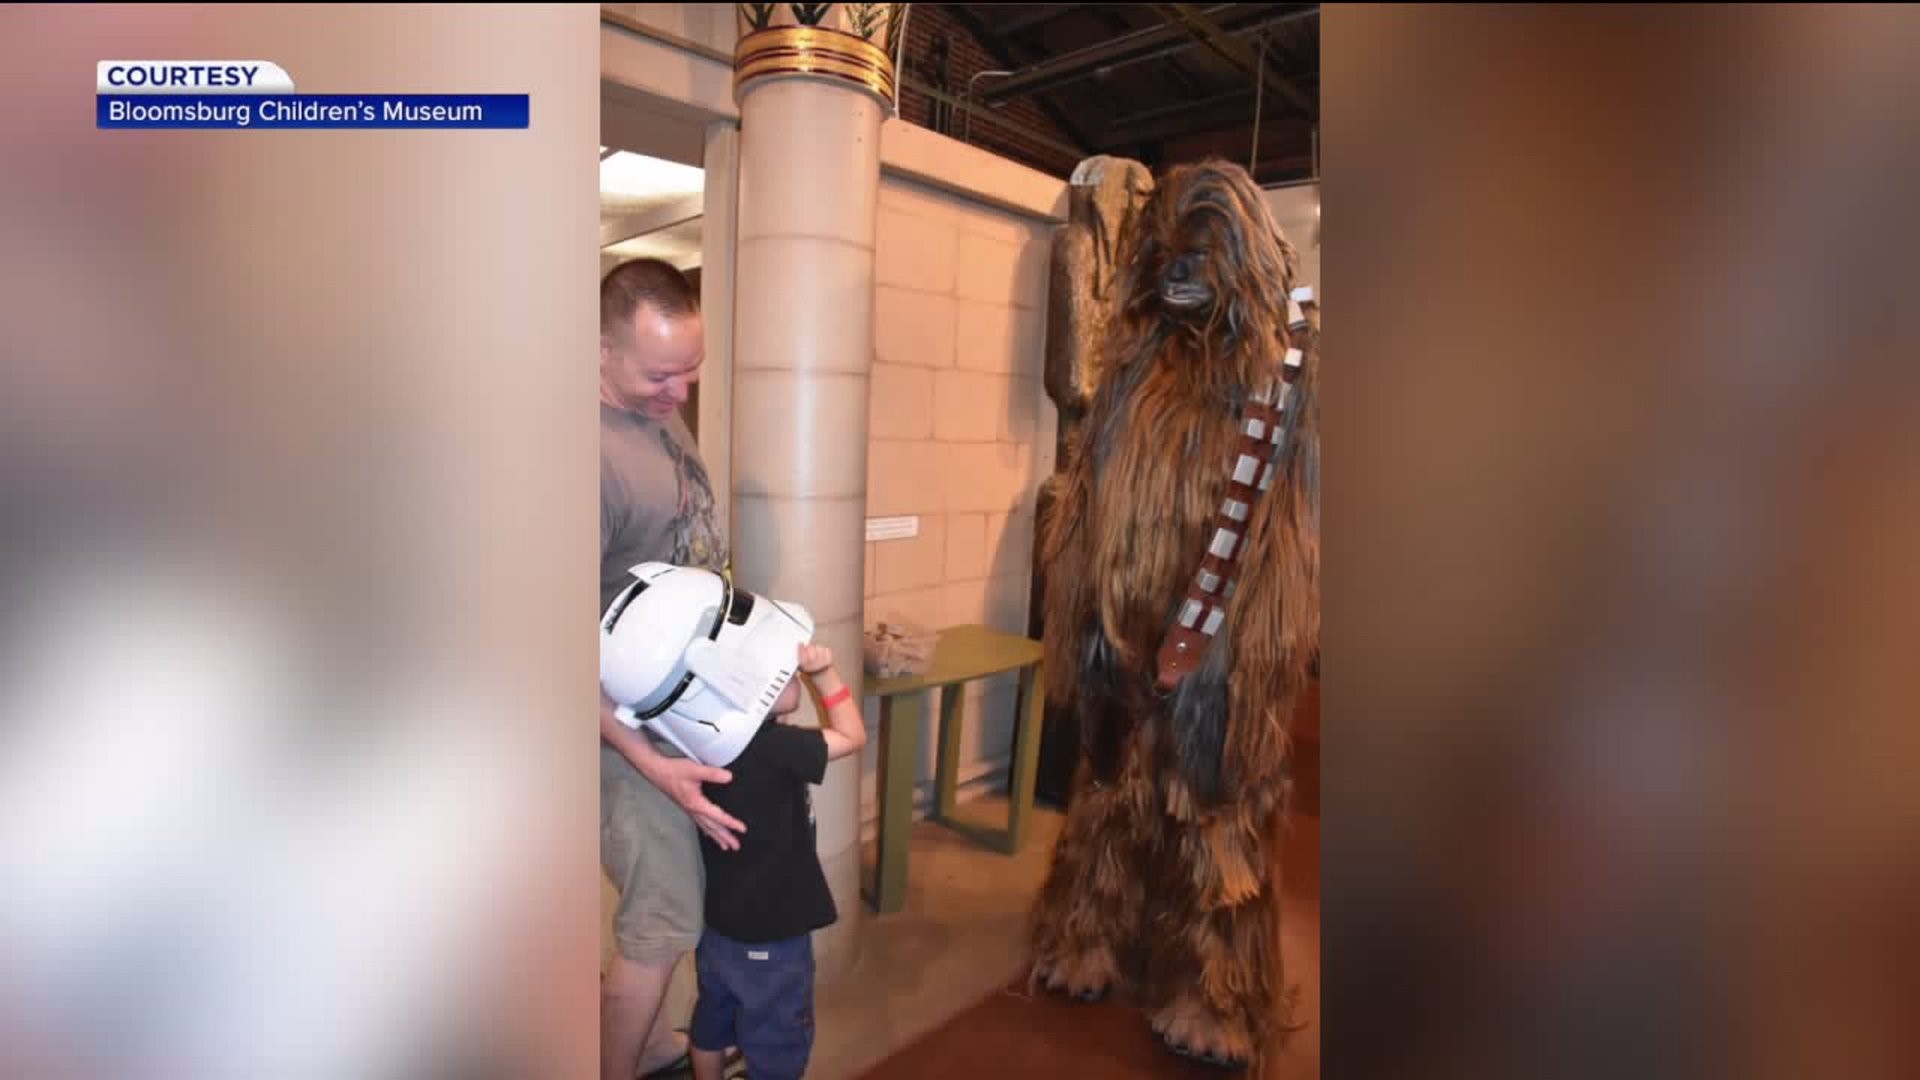 Star Wars Themed Event Helps Children's Museum